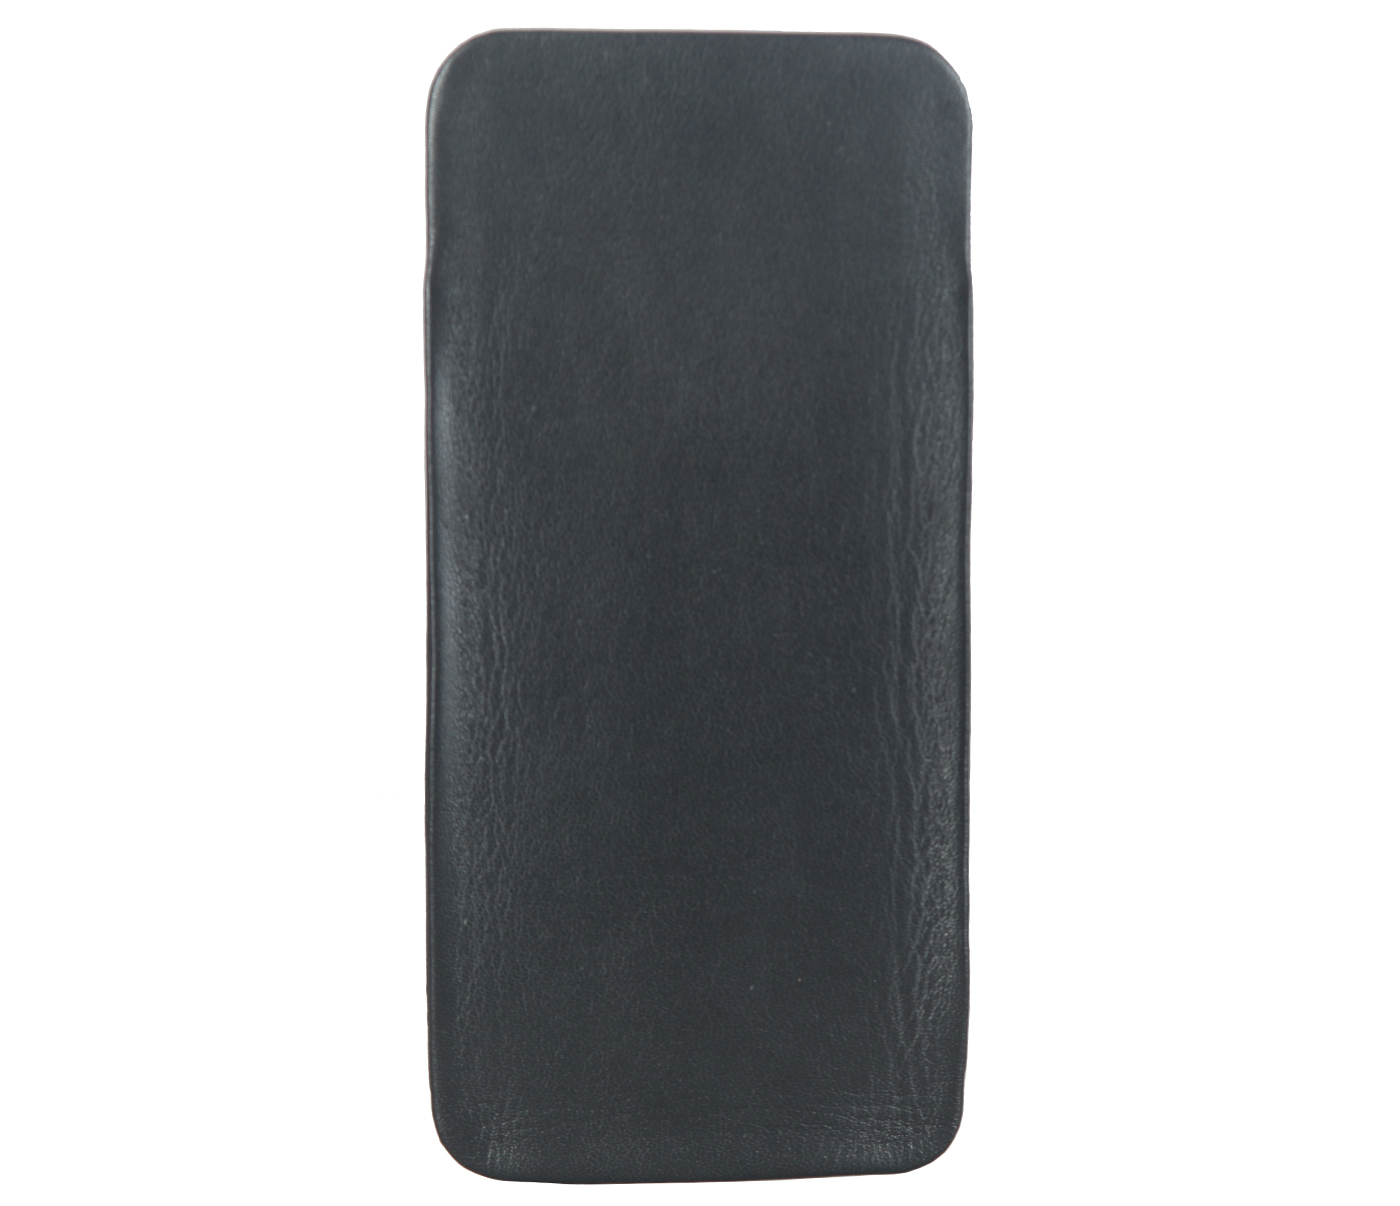 Spectacle Case--Soft stitch free spectacle case in Genuine Leather - Black